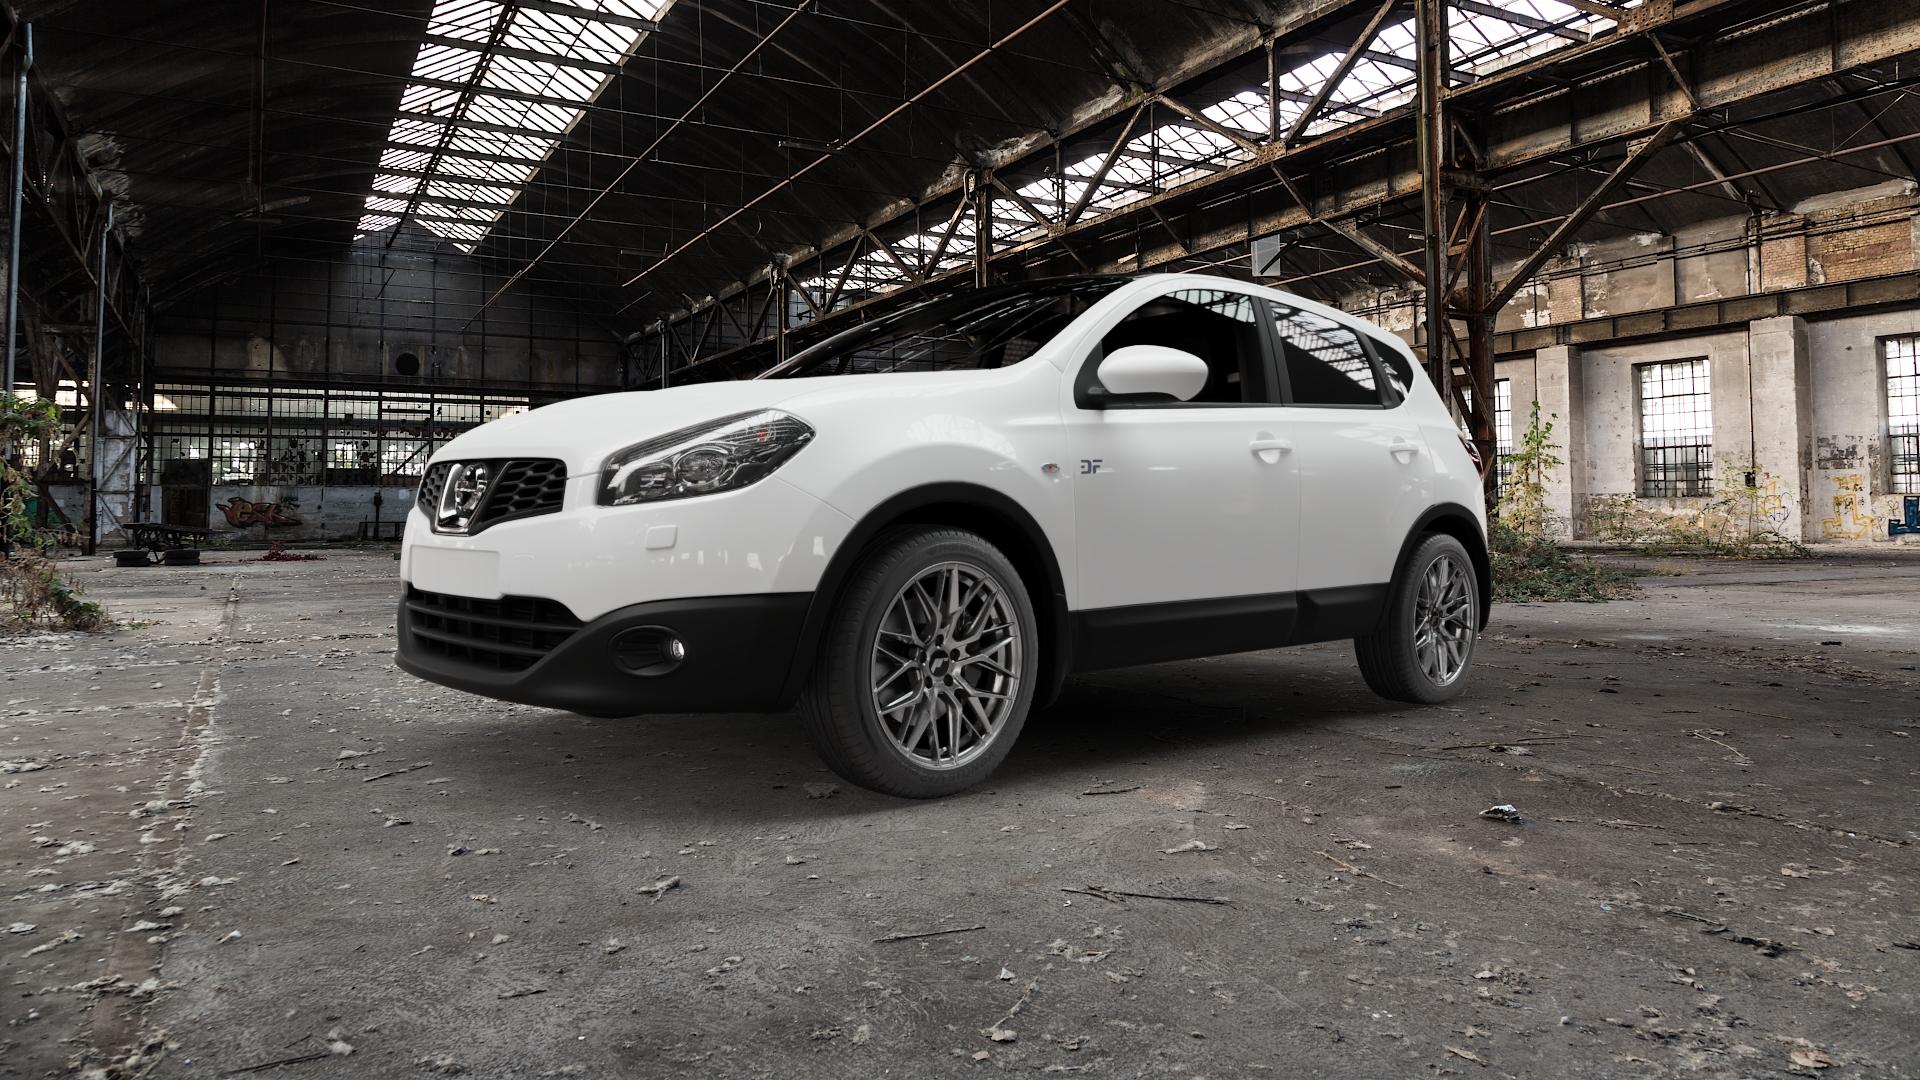 Nissan Qashqai +2 Type J10 1,6l 84kW (114 hp) Wheels and Tyre Packages